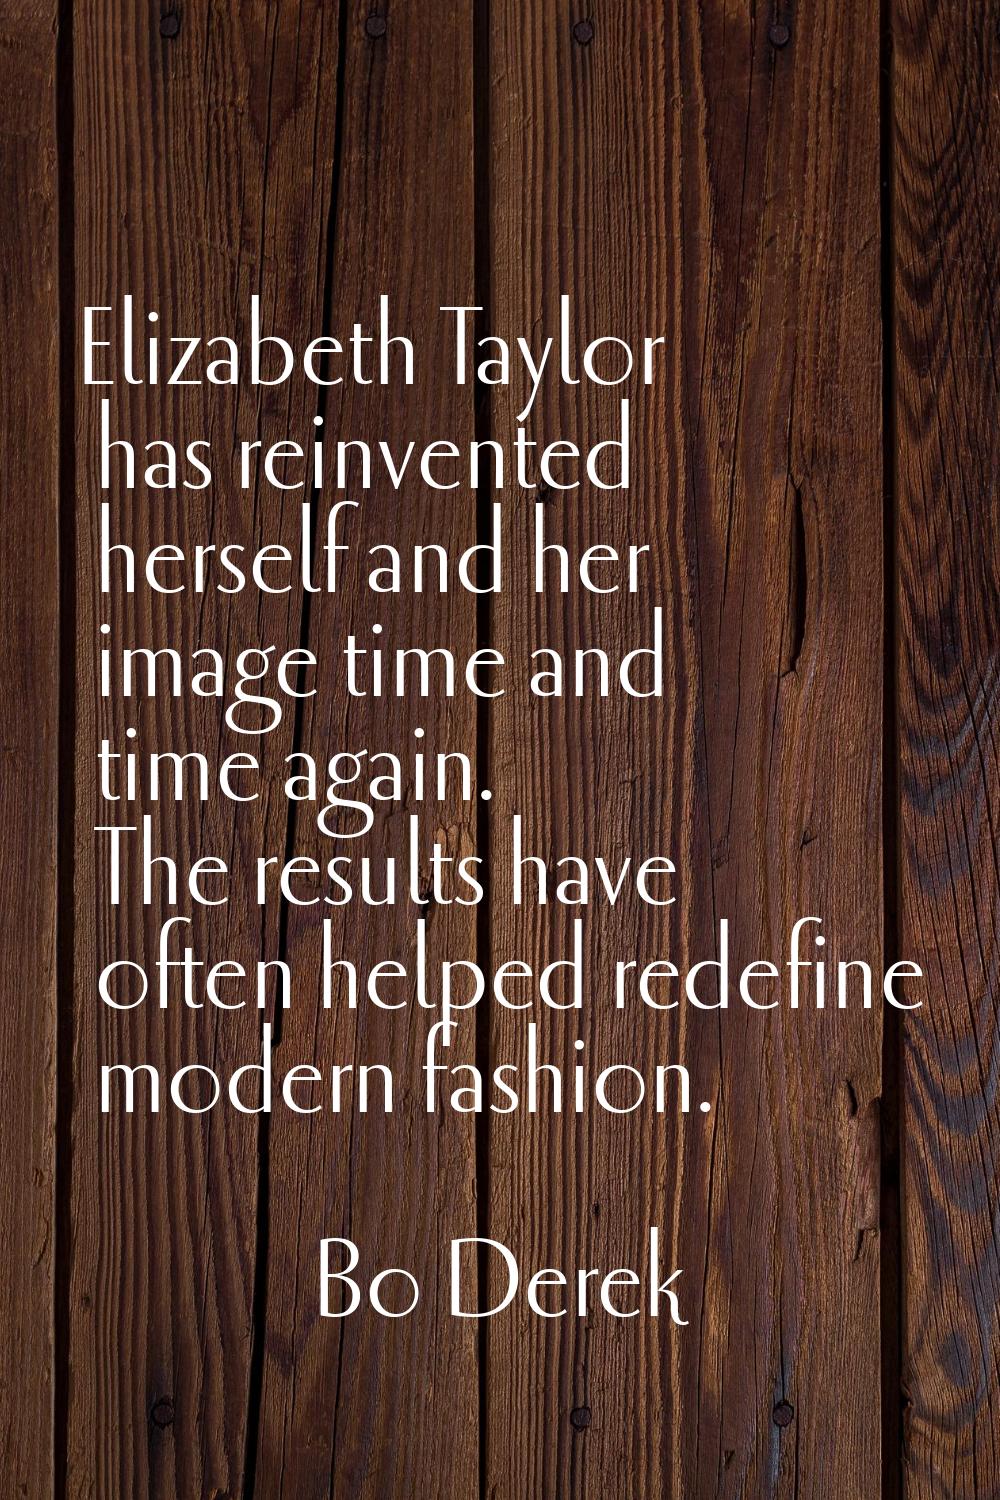 Elizabeth Taylor has reinvented herself and her image time and time again. The results have often h